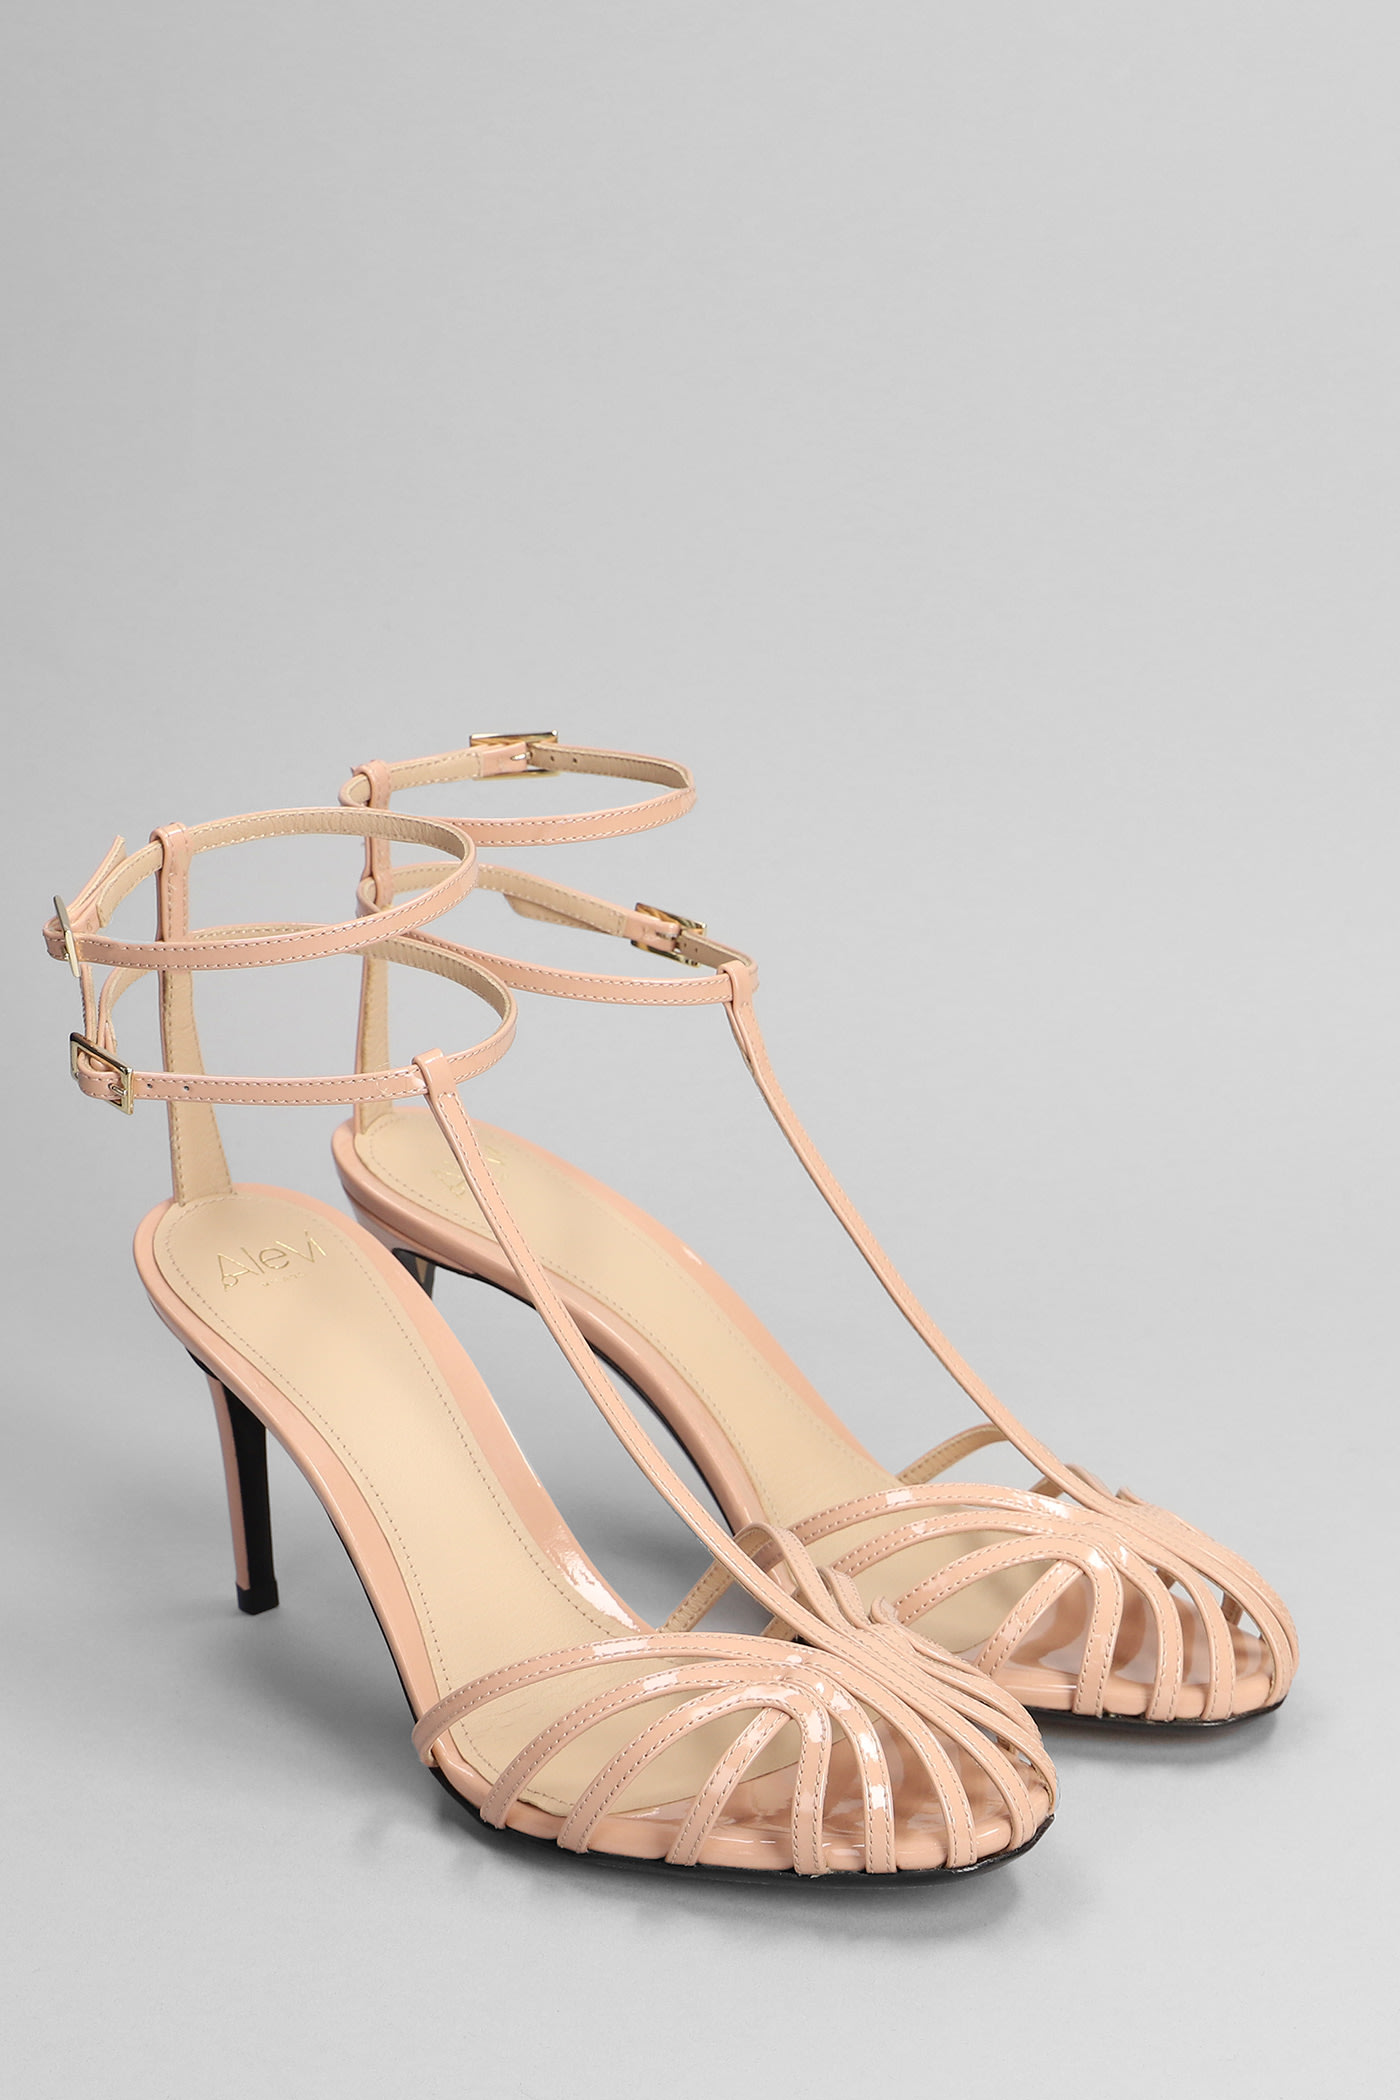 Shop Alevì Anna 80 Sandals In Powder Patent Leather